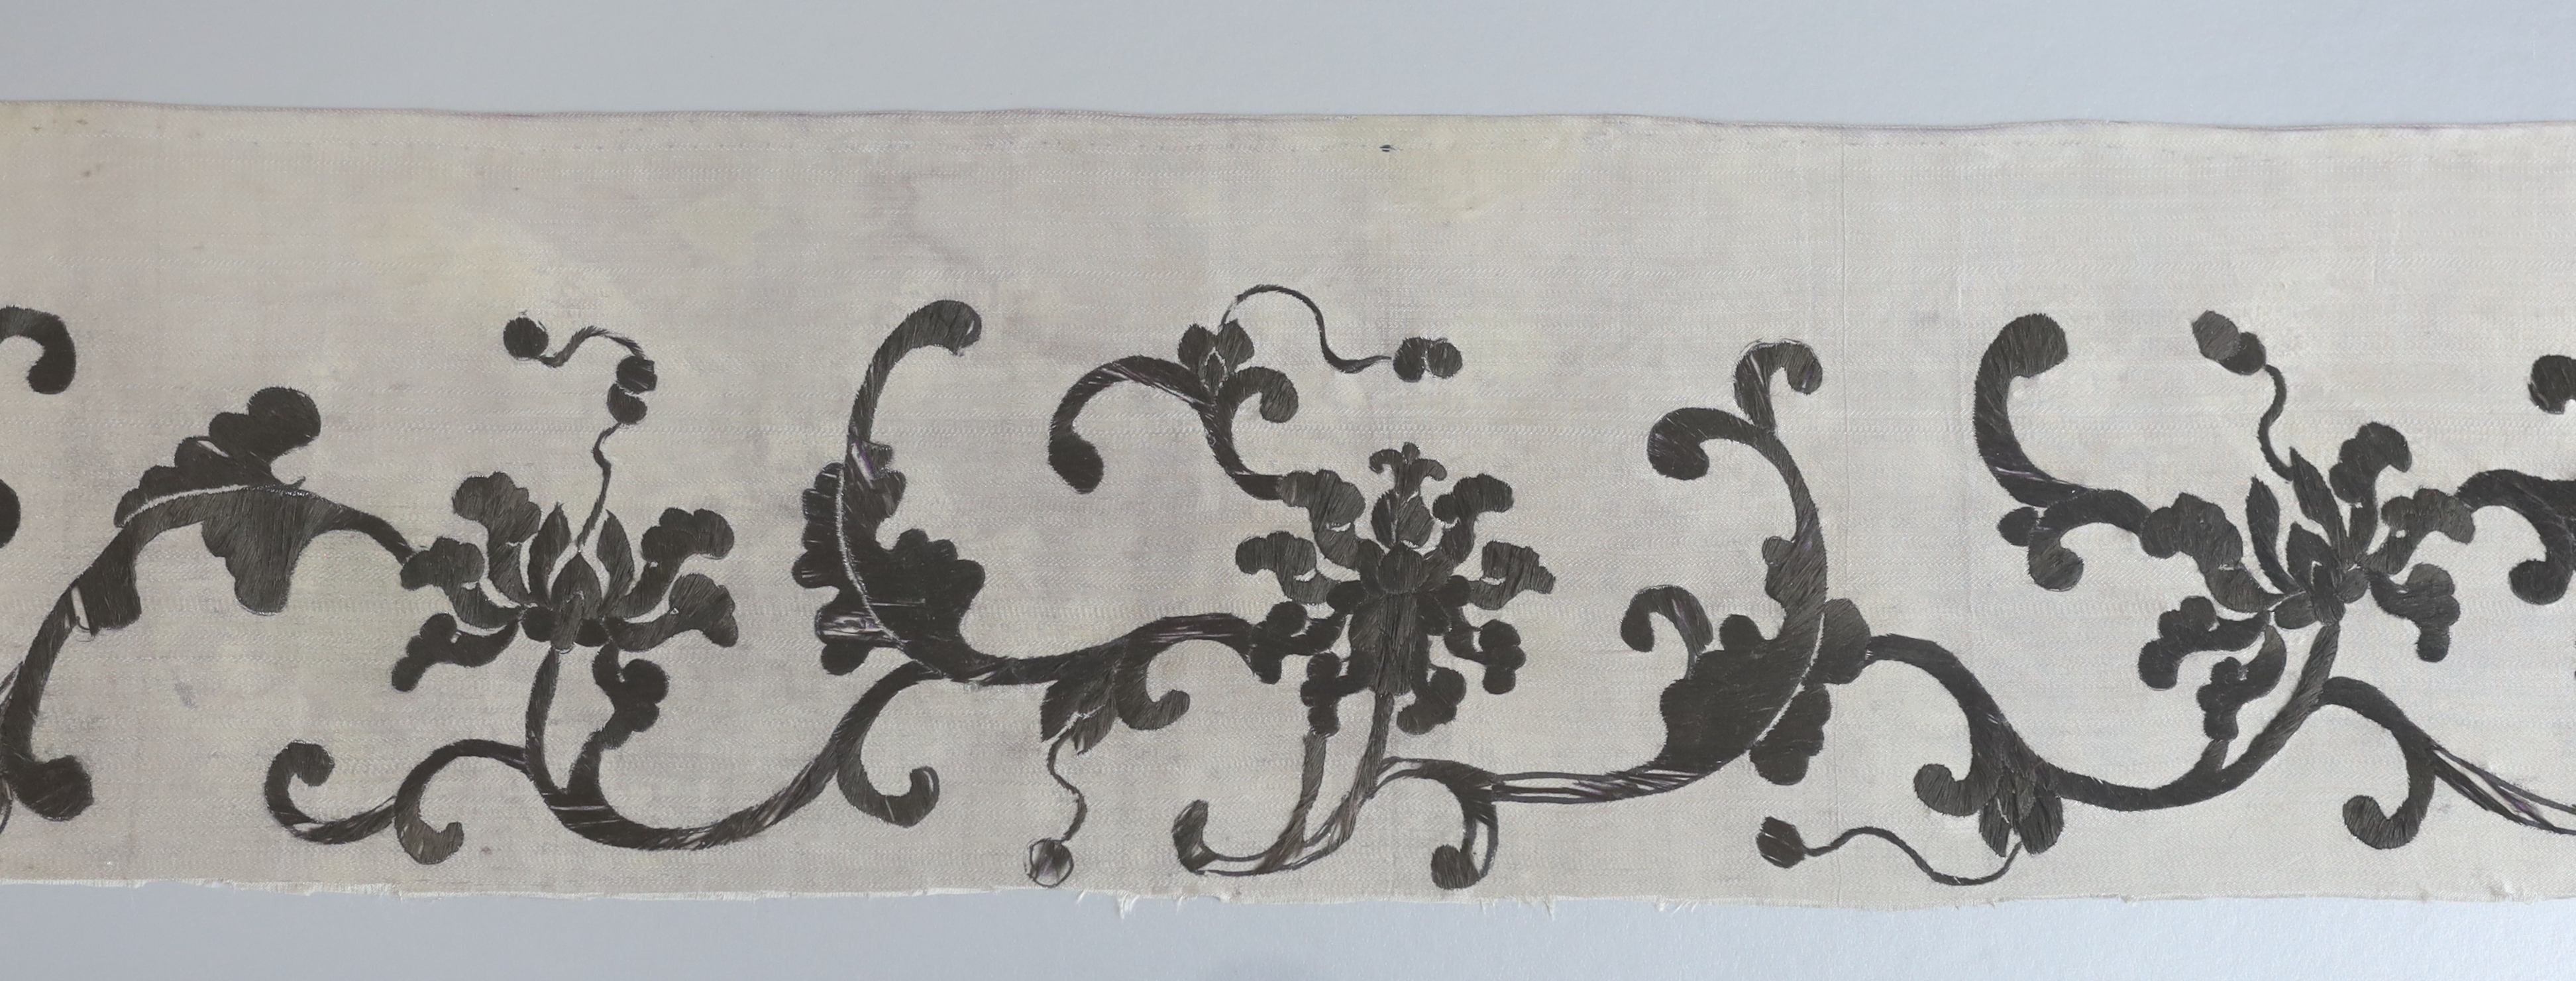 A late 19th century Chinese black and cream silk embroidery, mounted together with an inscribed calligraphic stone, a pair of white metal chop sticks and a similar dish, embroidery: 5.5cm wide, 105cm long